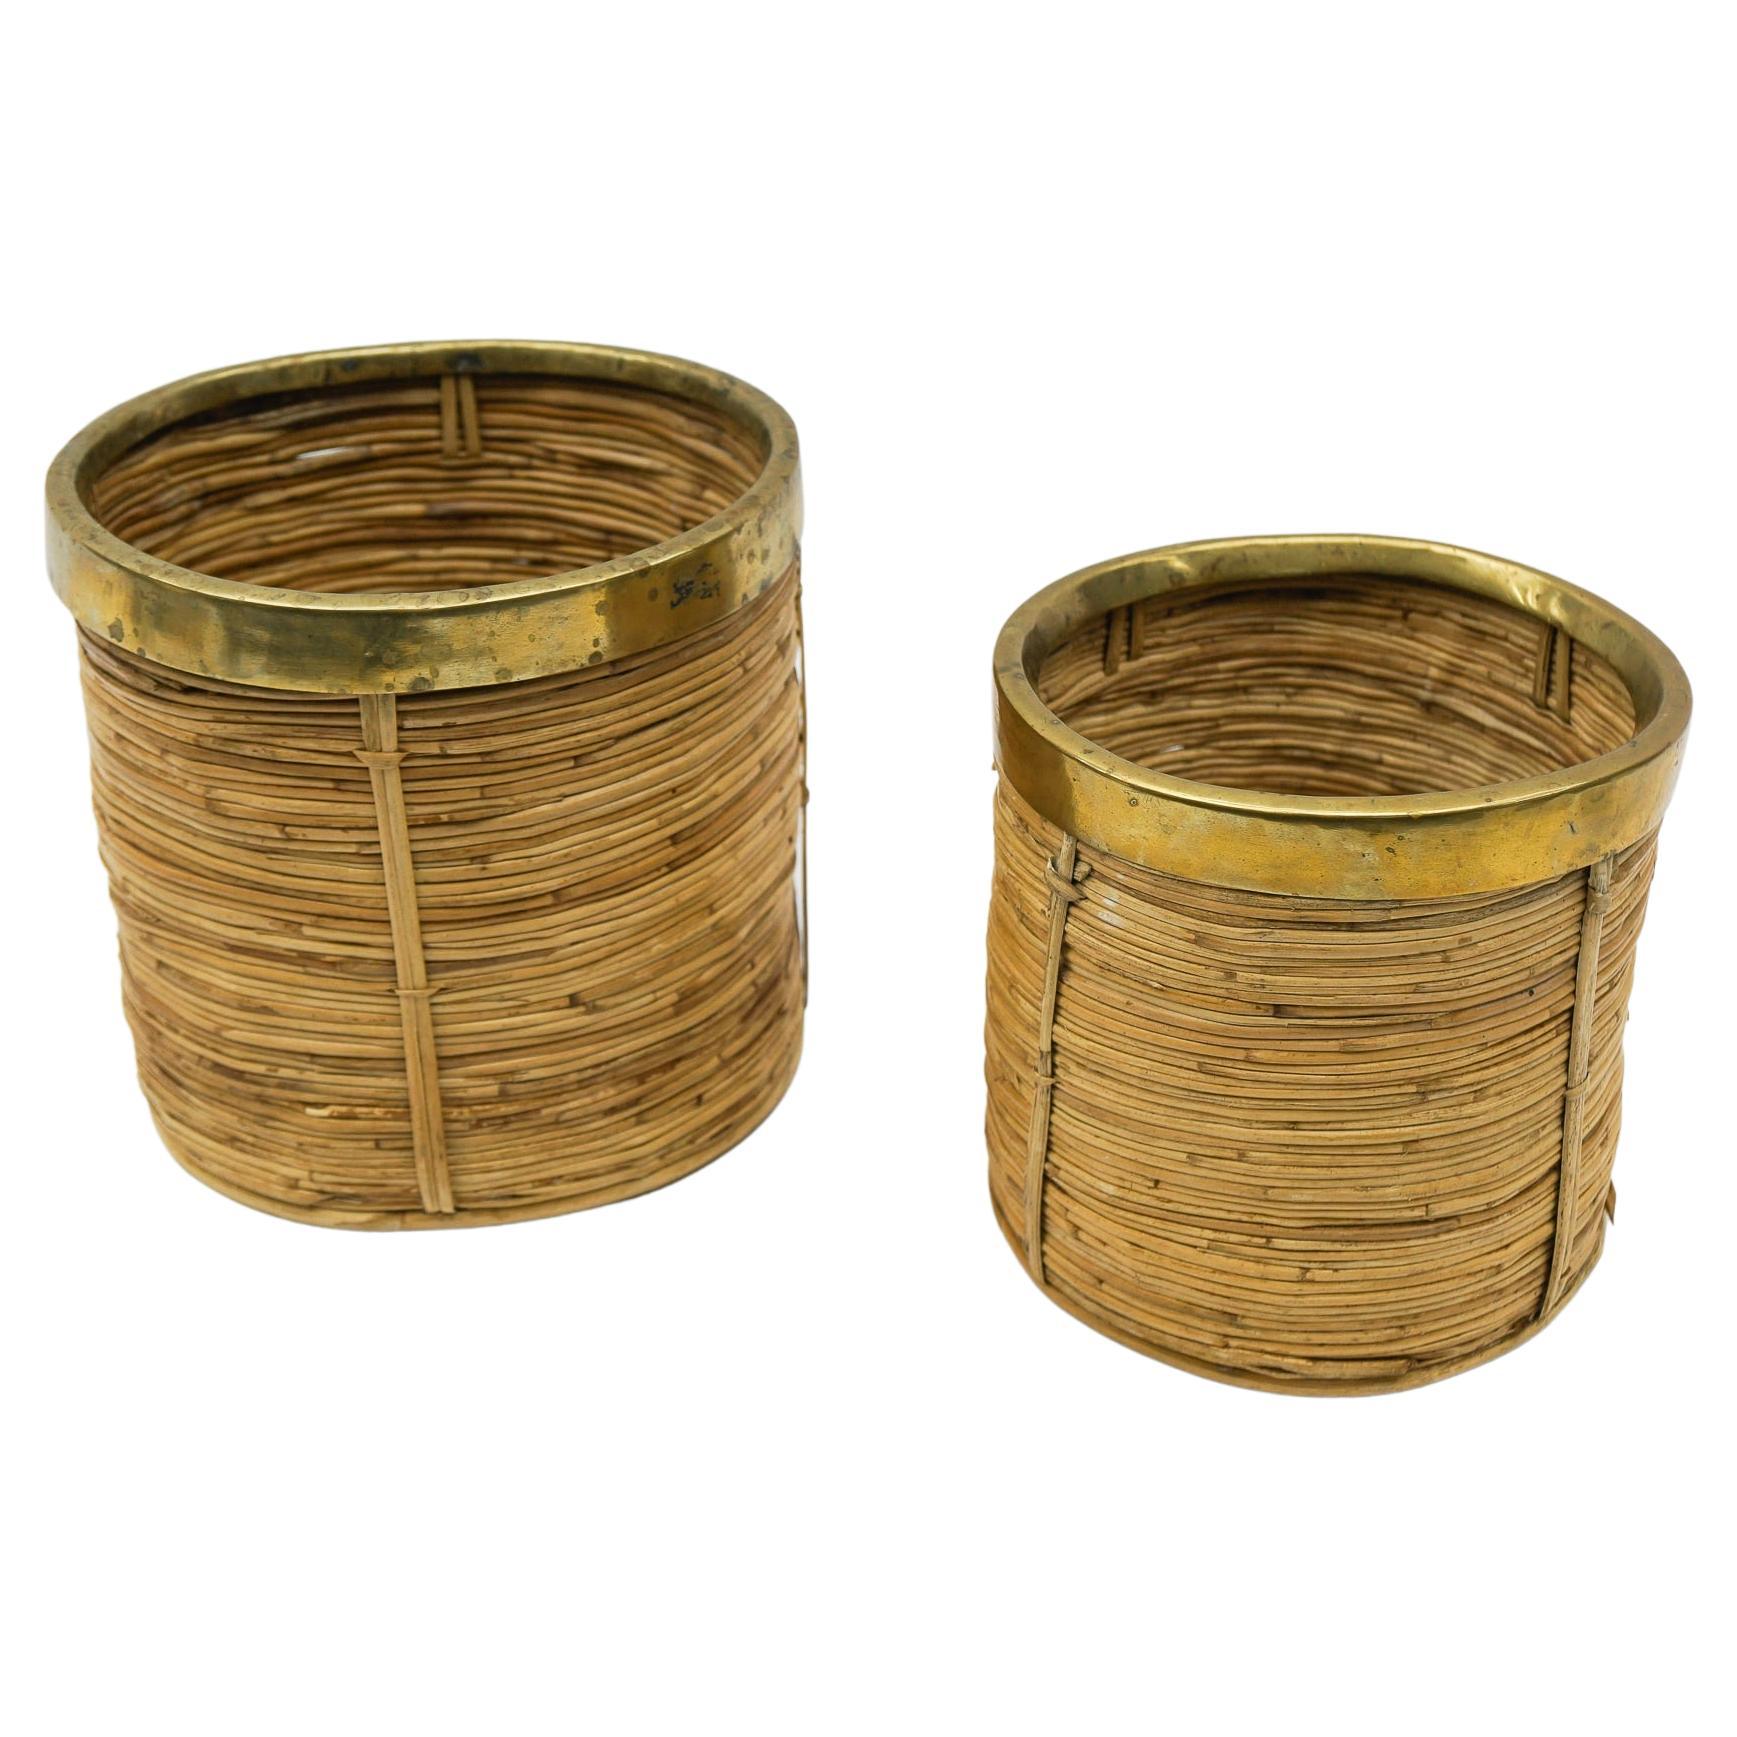 Set of Two Rattan and Brass Midcentury Handcrafted Planter, Austria, 1950s